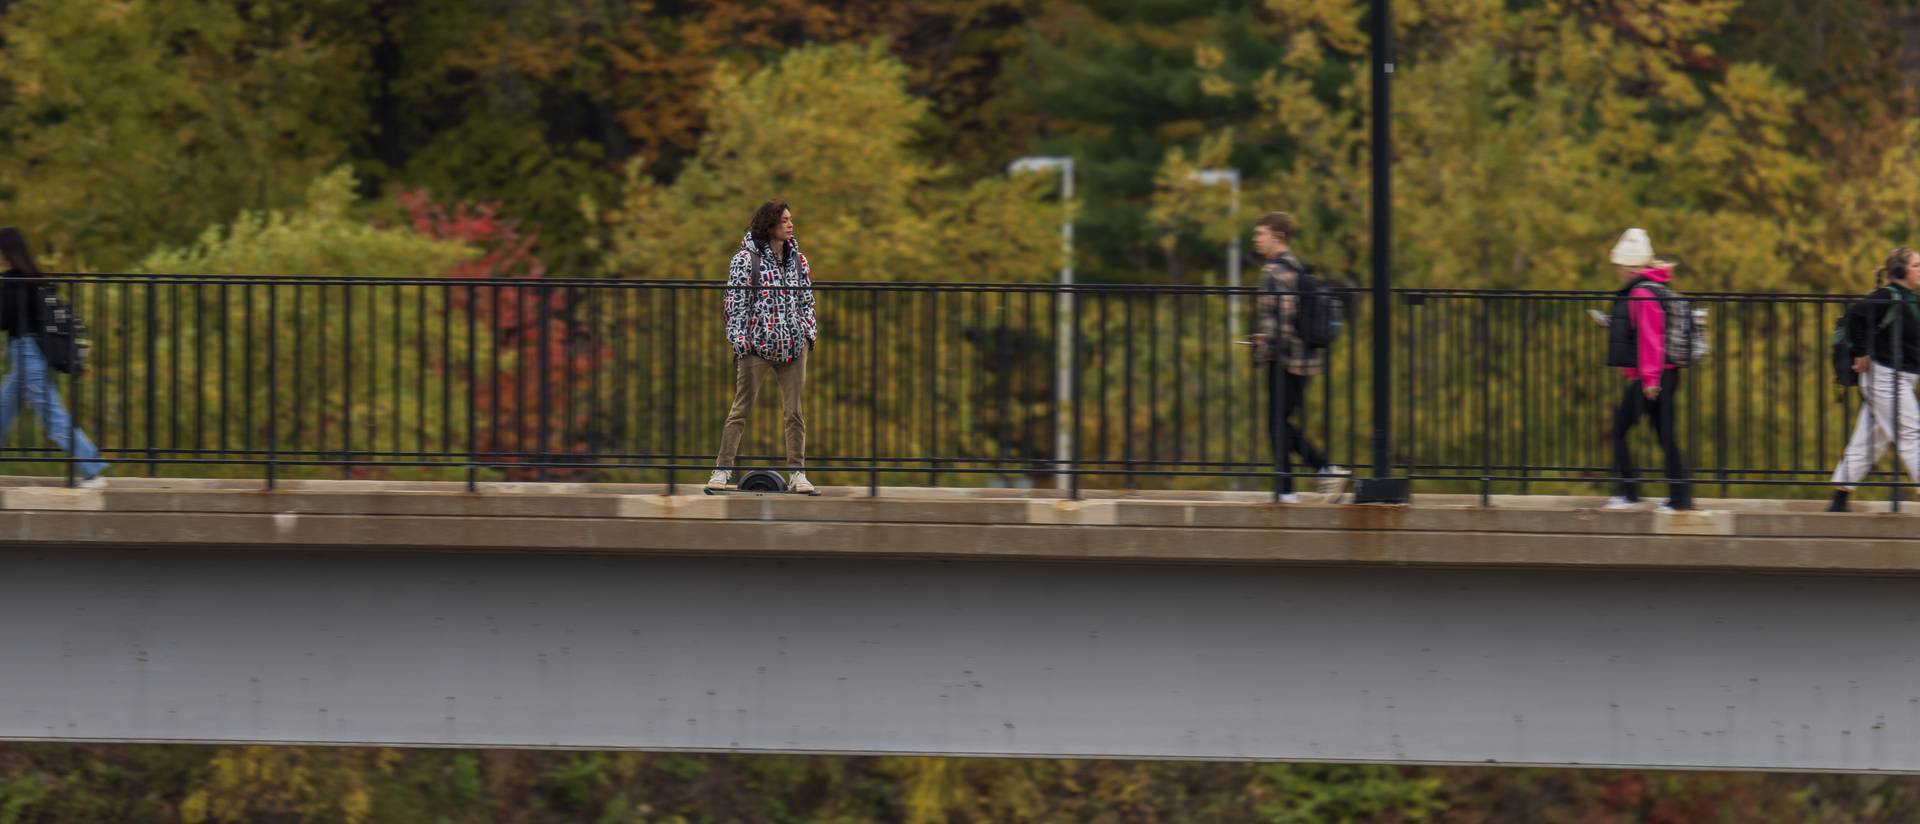 one wheel device rider on the UWEC footbridge on a fall day